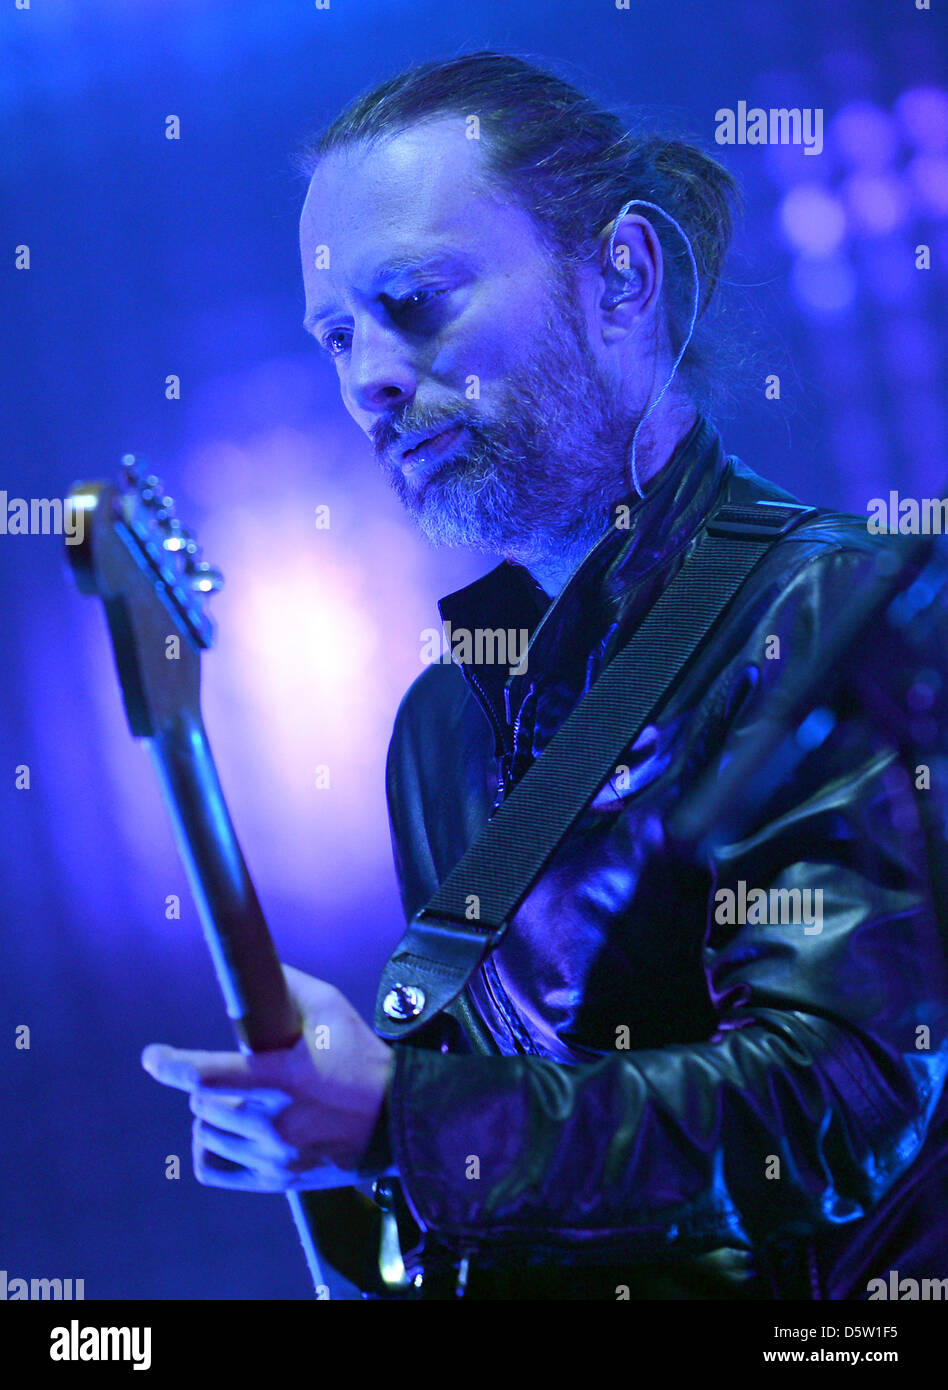 Singer Thom Yorke and the English band Radiohead perform open air at Wuhlheide stage in Berlin, Germany, 29 September 2012. Photo: BRITTA PEDERSEN Stock Photo